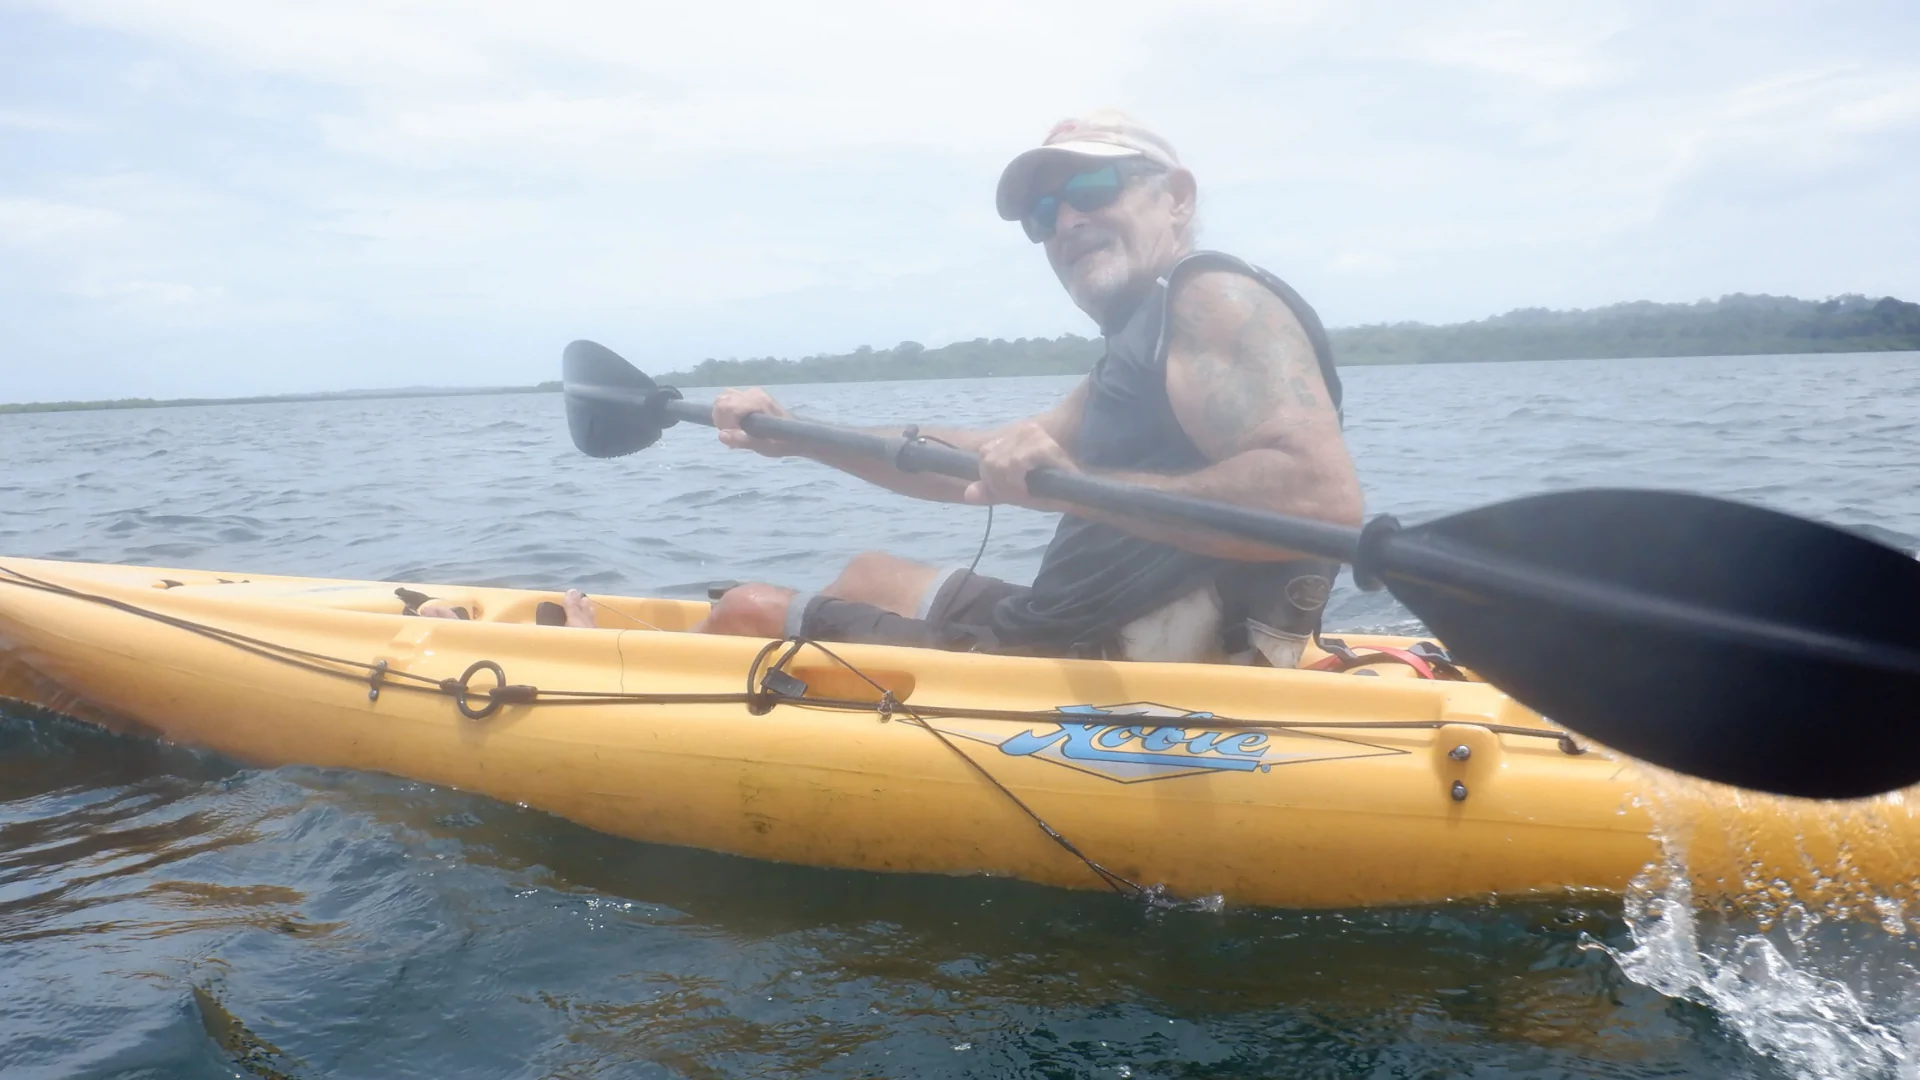 The author looks into the camera as he paddles a kayak